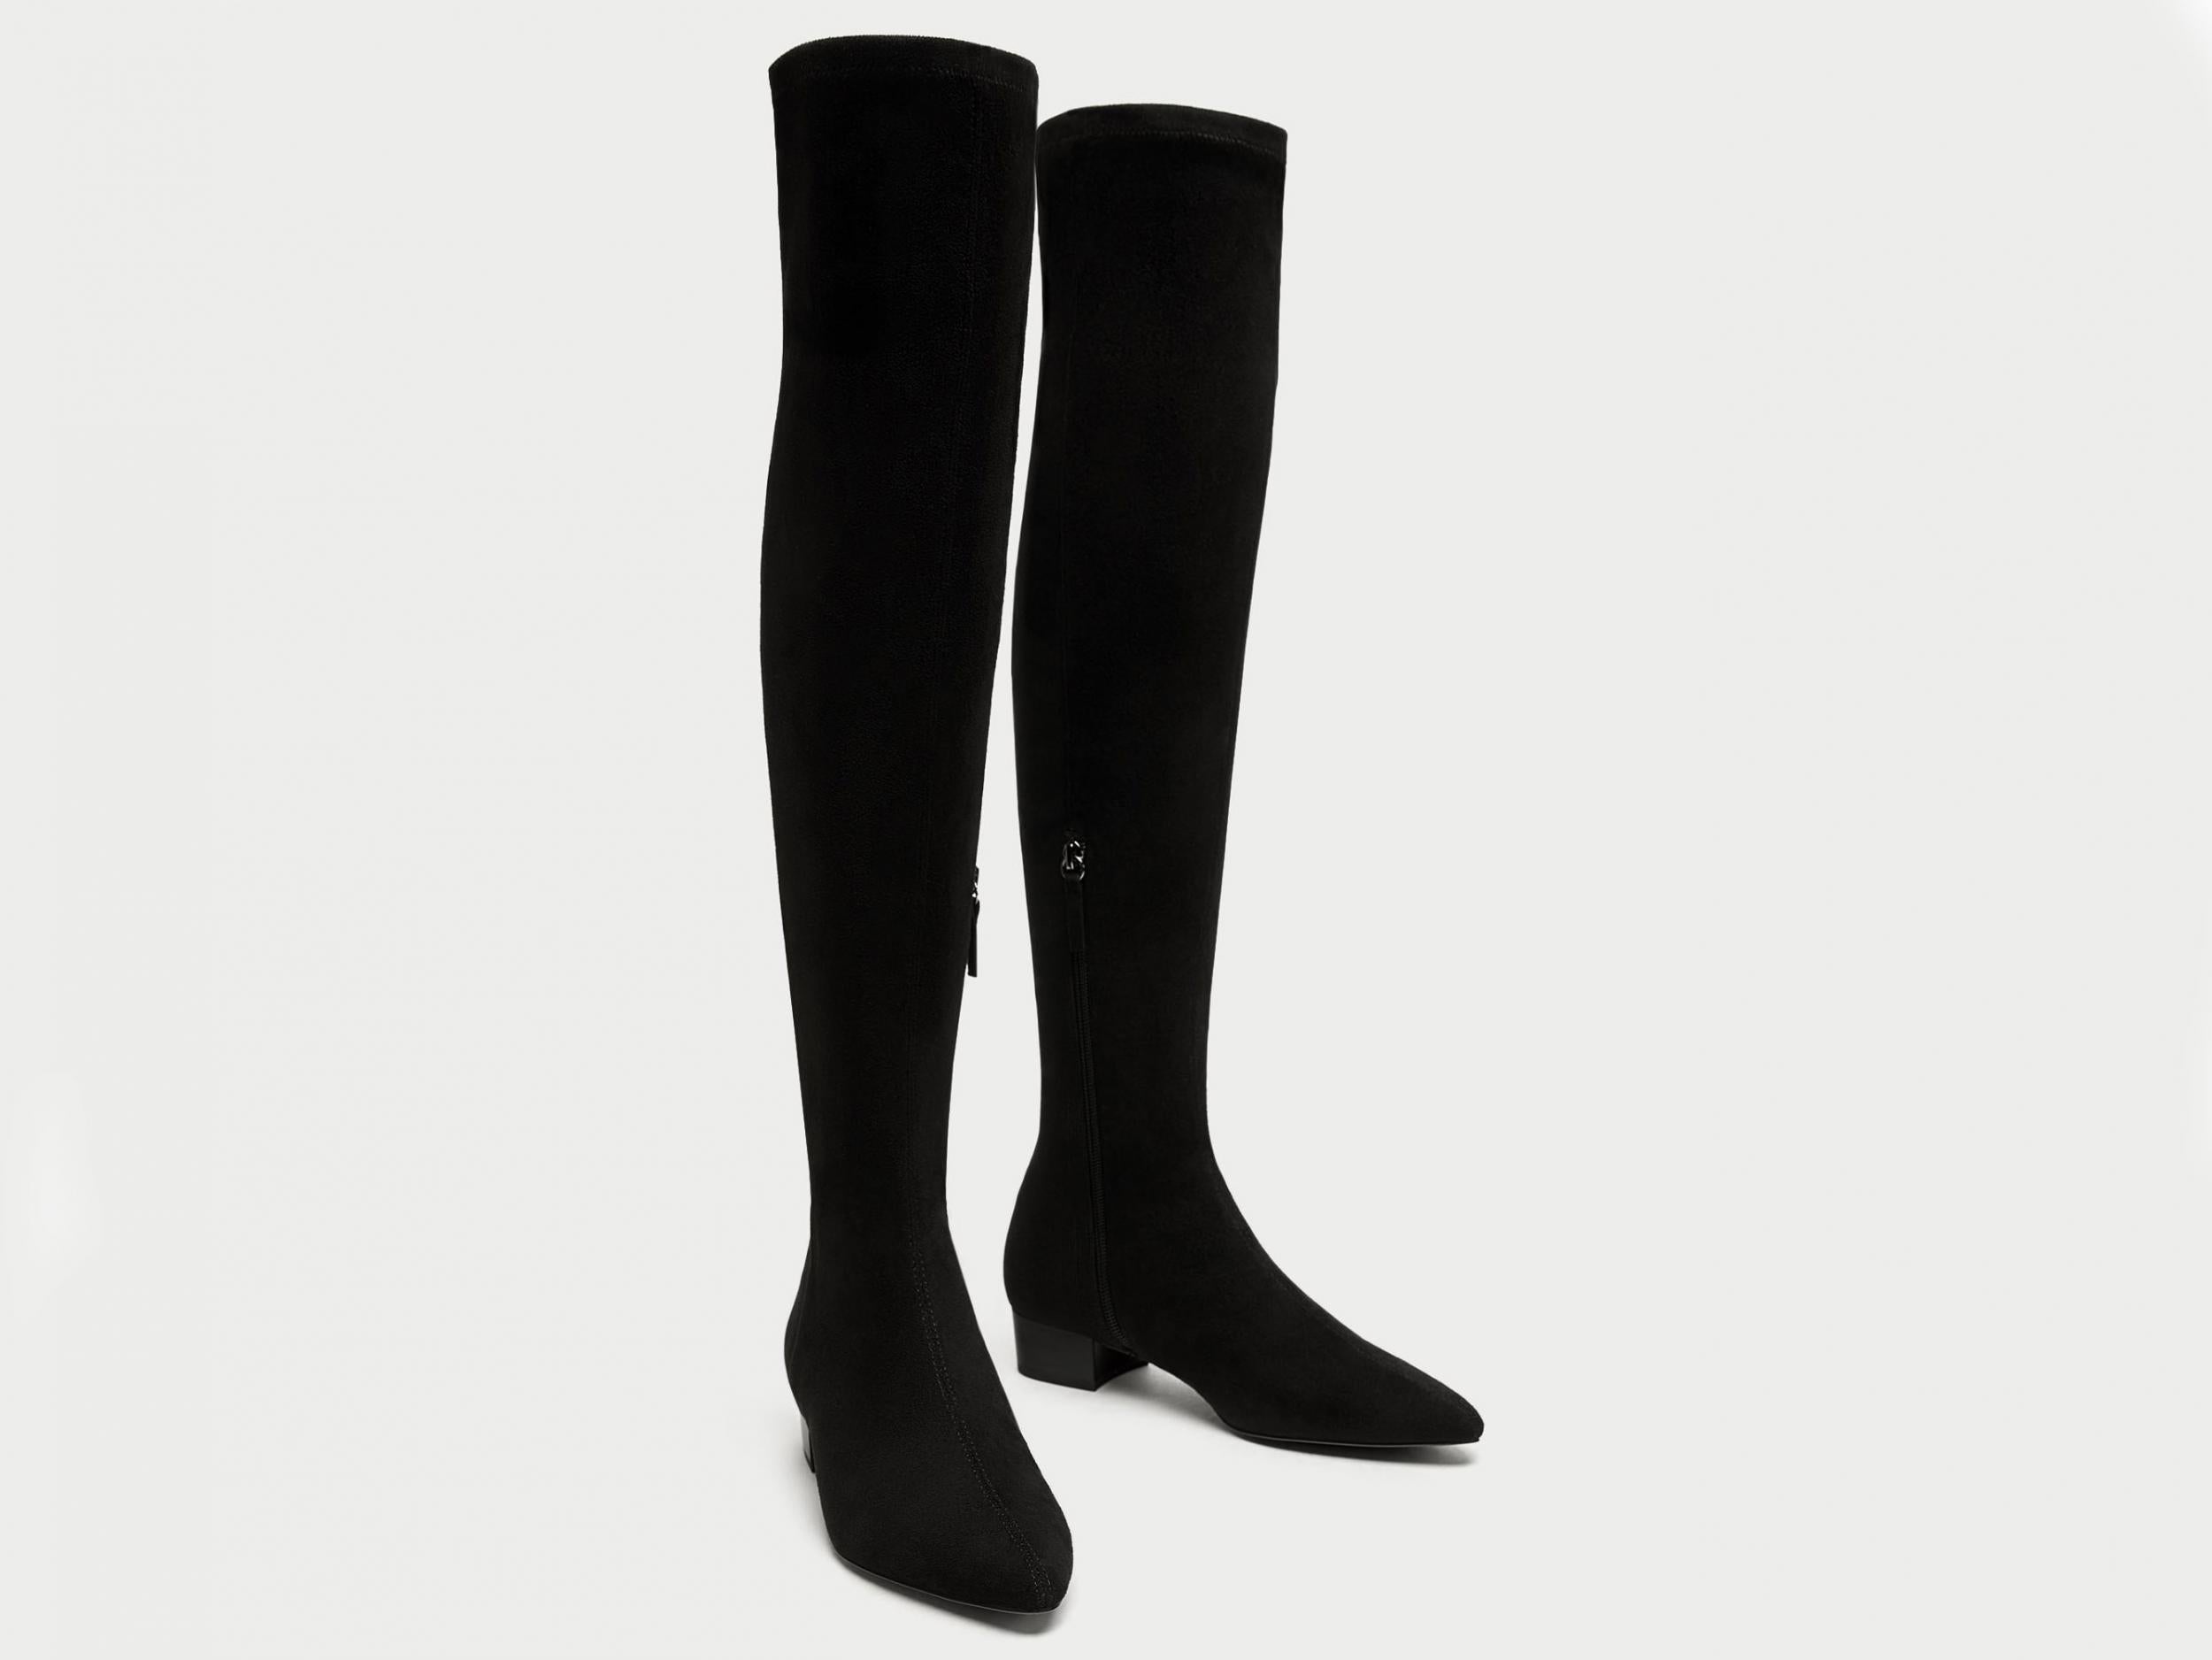 Combined Flat Over-The-Knee Boots, £25.99, Zara